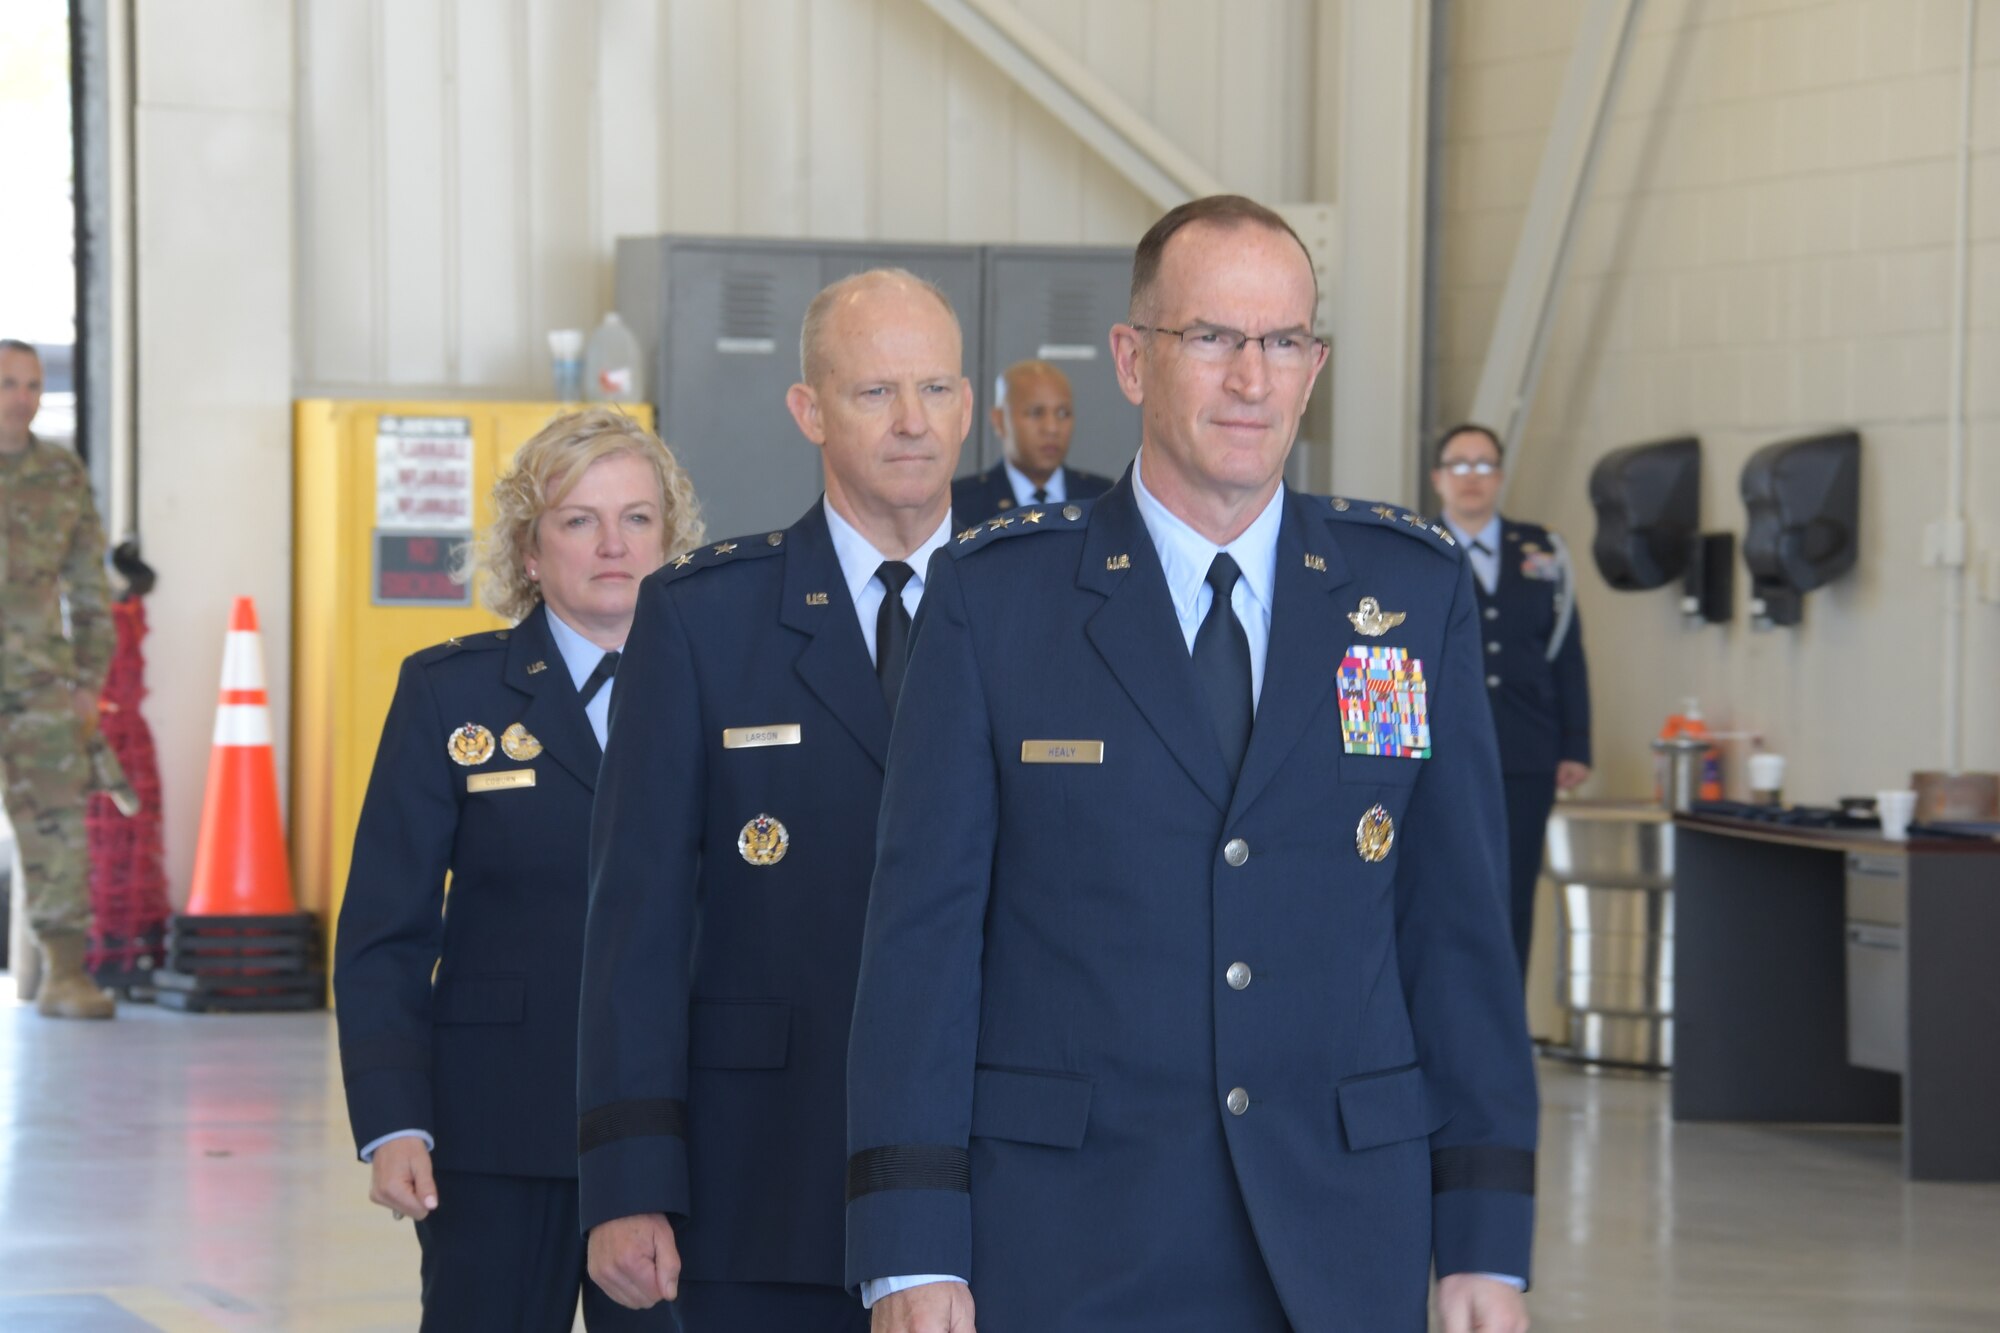 Brig. Gen. Melissa A. Coburn (back) prepares to take command of 22nd Air Force from Maj. Gen. Bret C. Larson (center) during a ceremony at Dobbins Air Reserve Base, Georgia, April 2. 2023. The ceremony was officiated by Lt. Gen. John P. Healy (front) commander of Air Force Reserve and Chief of the Air Force Reserve.